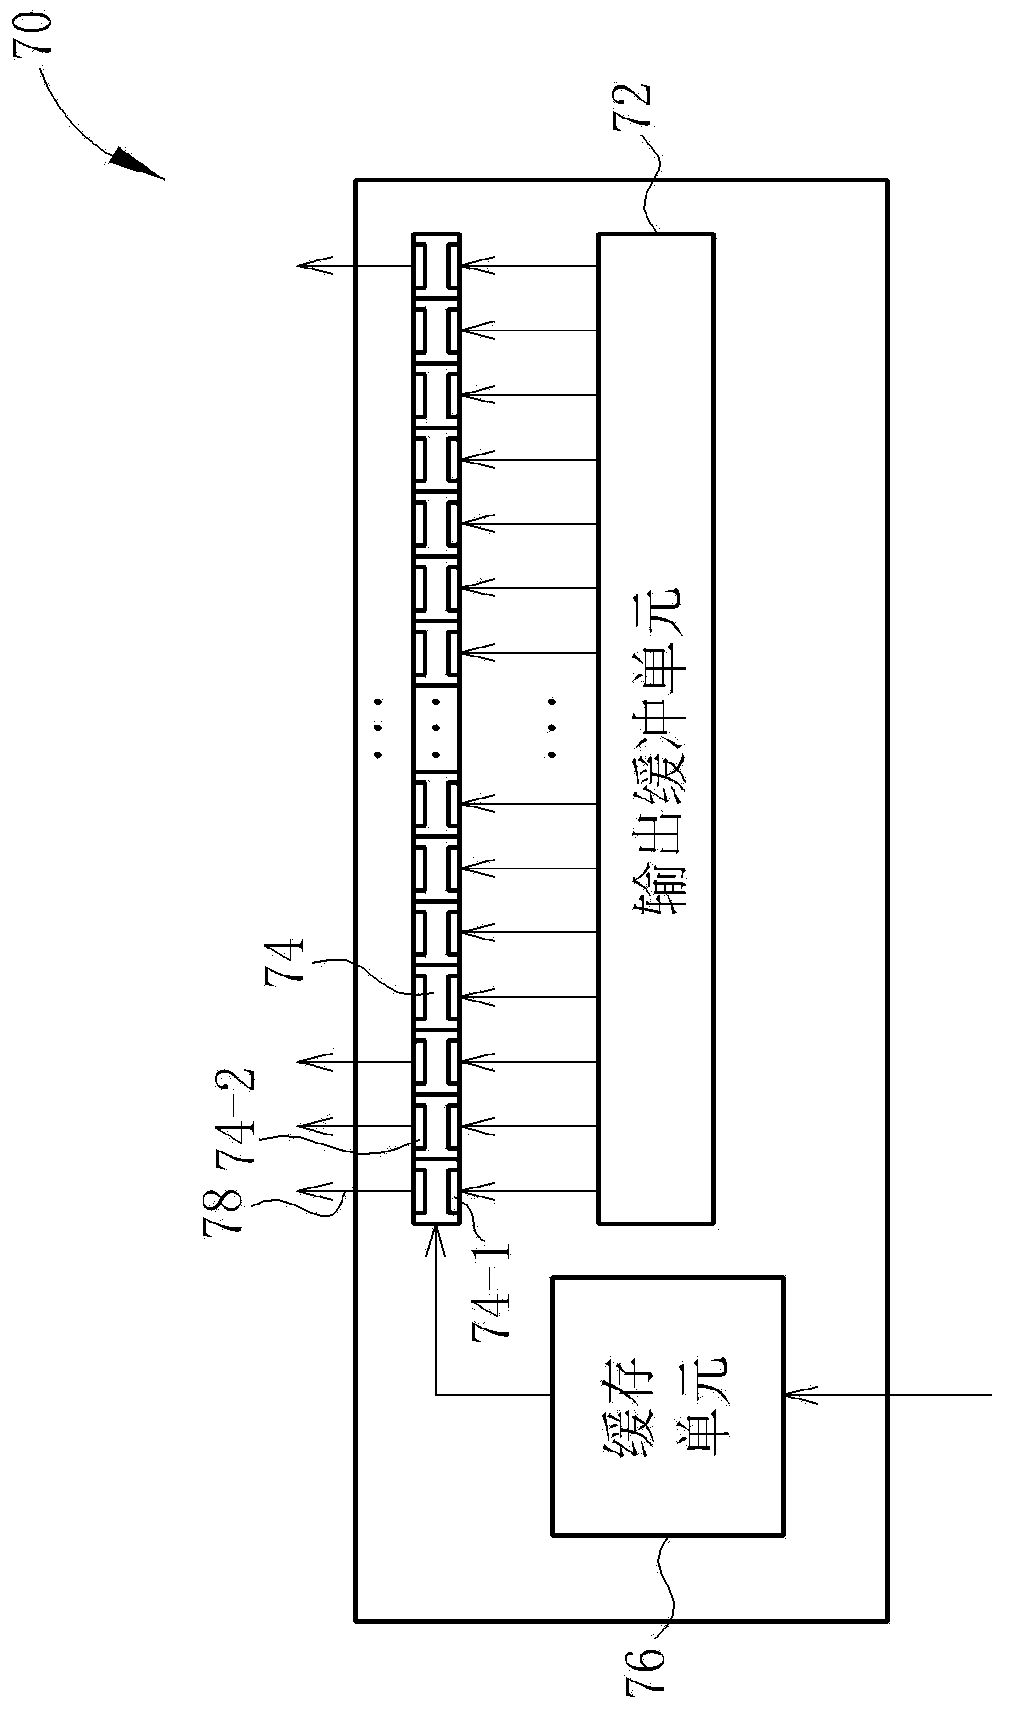 Display control system and electronic device